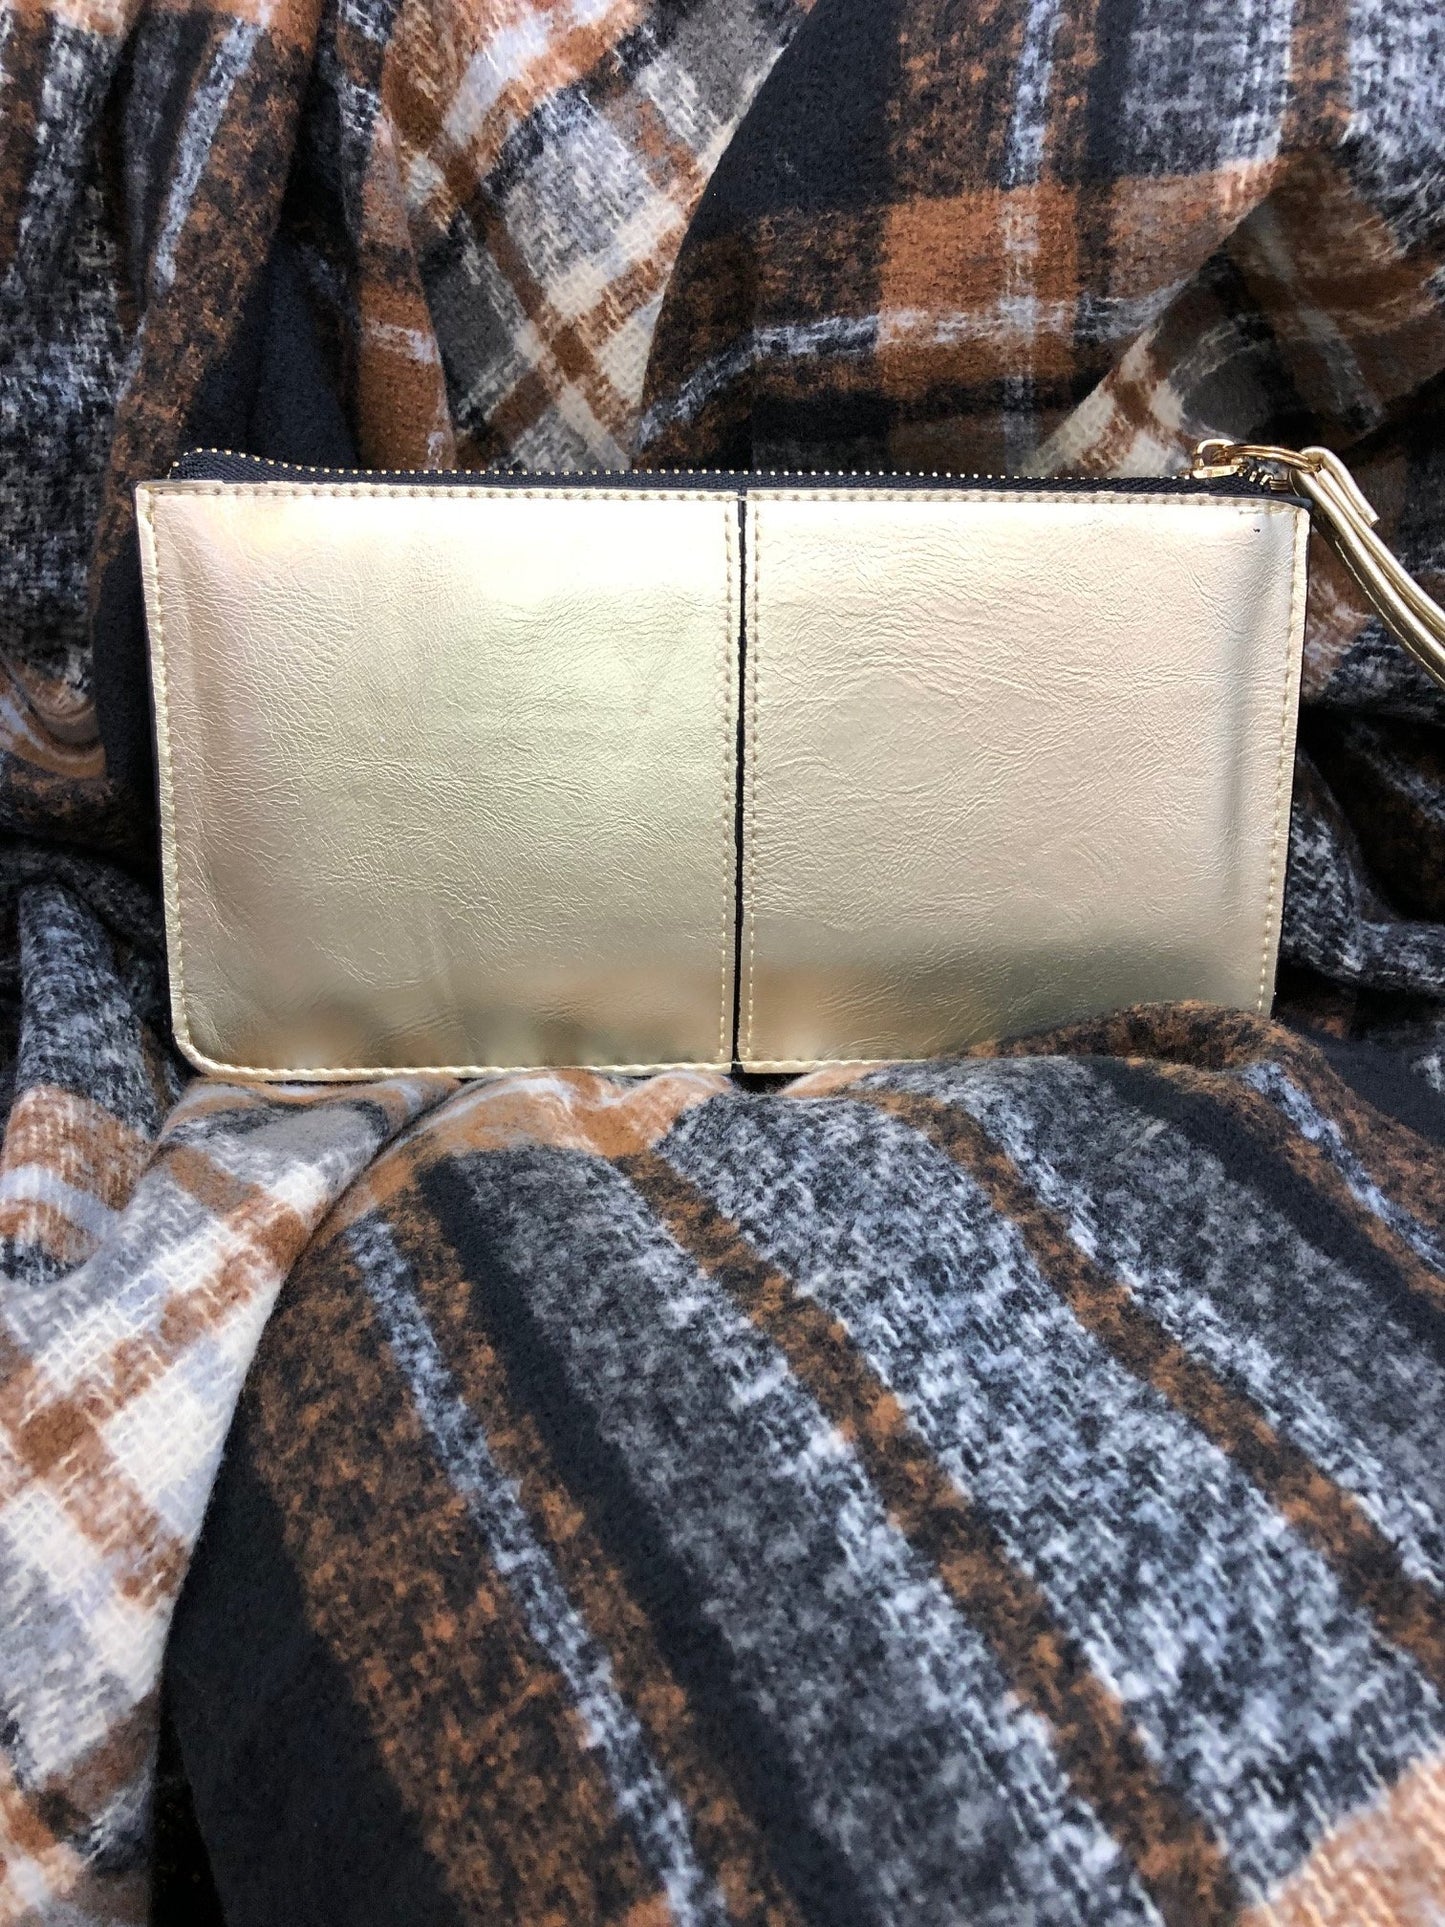 Small clutch bag with wrist strap - gold